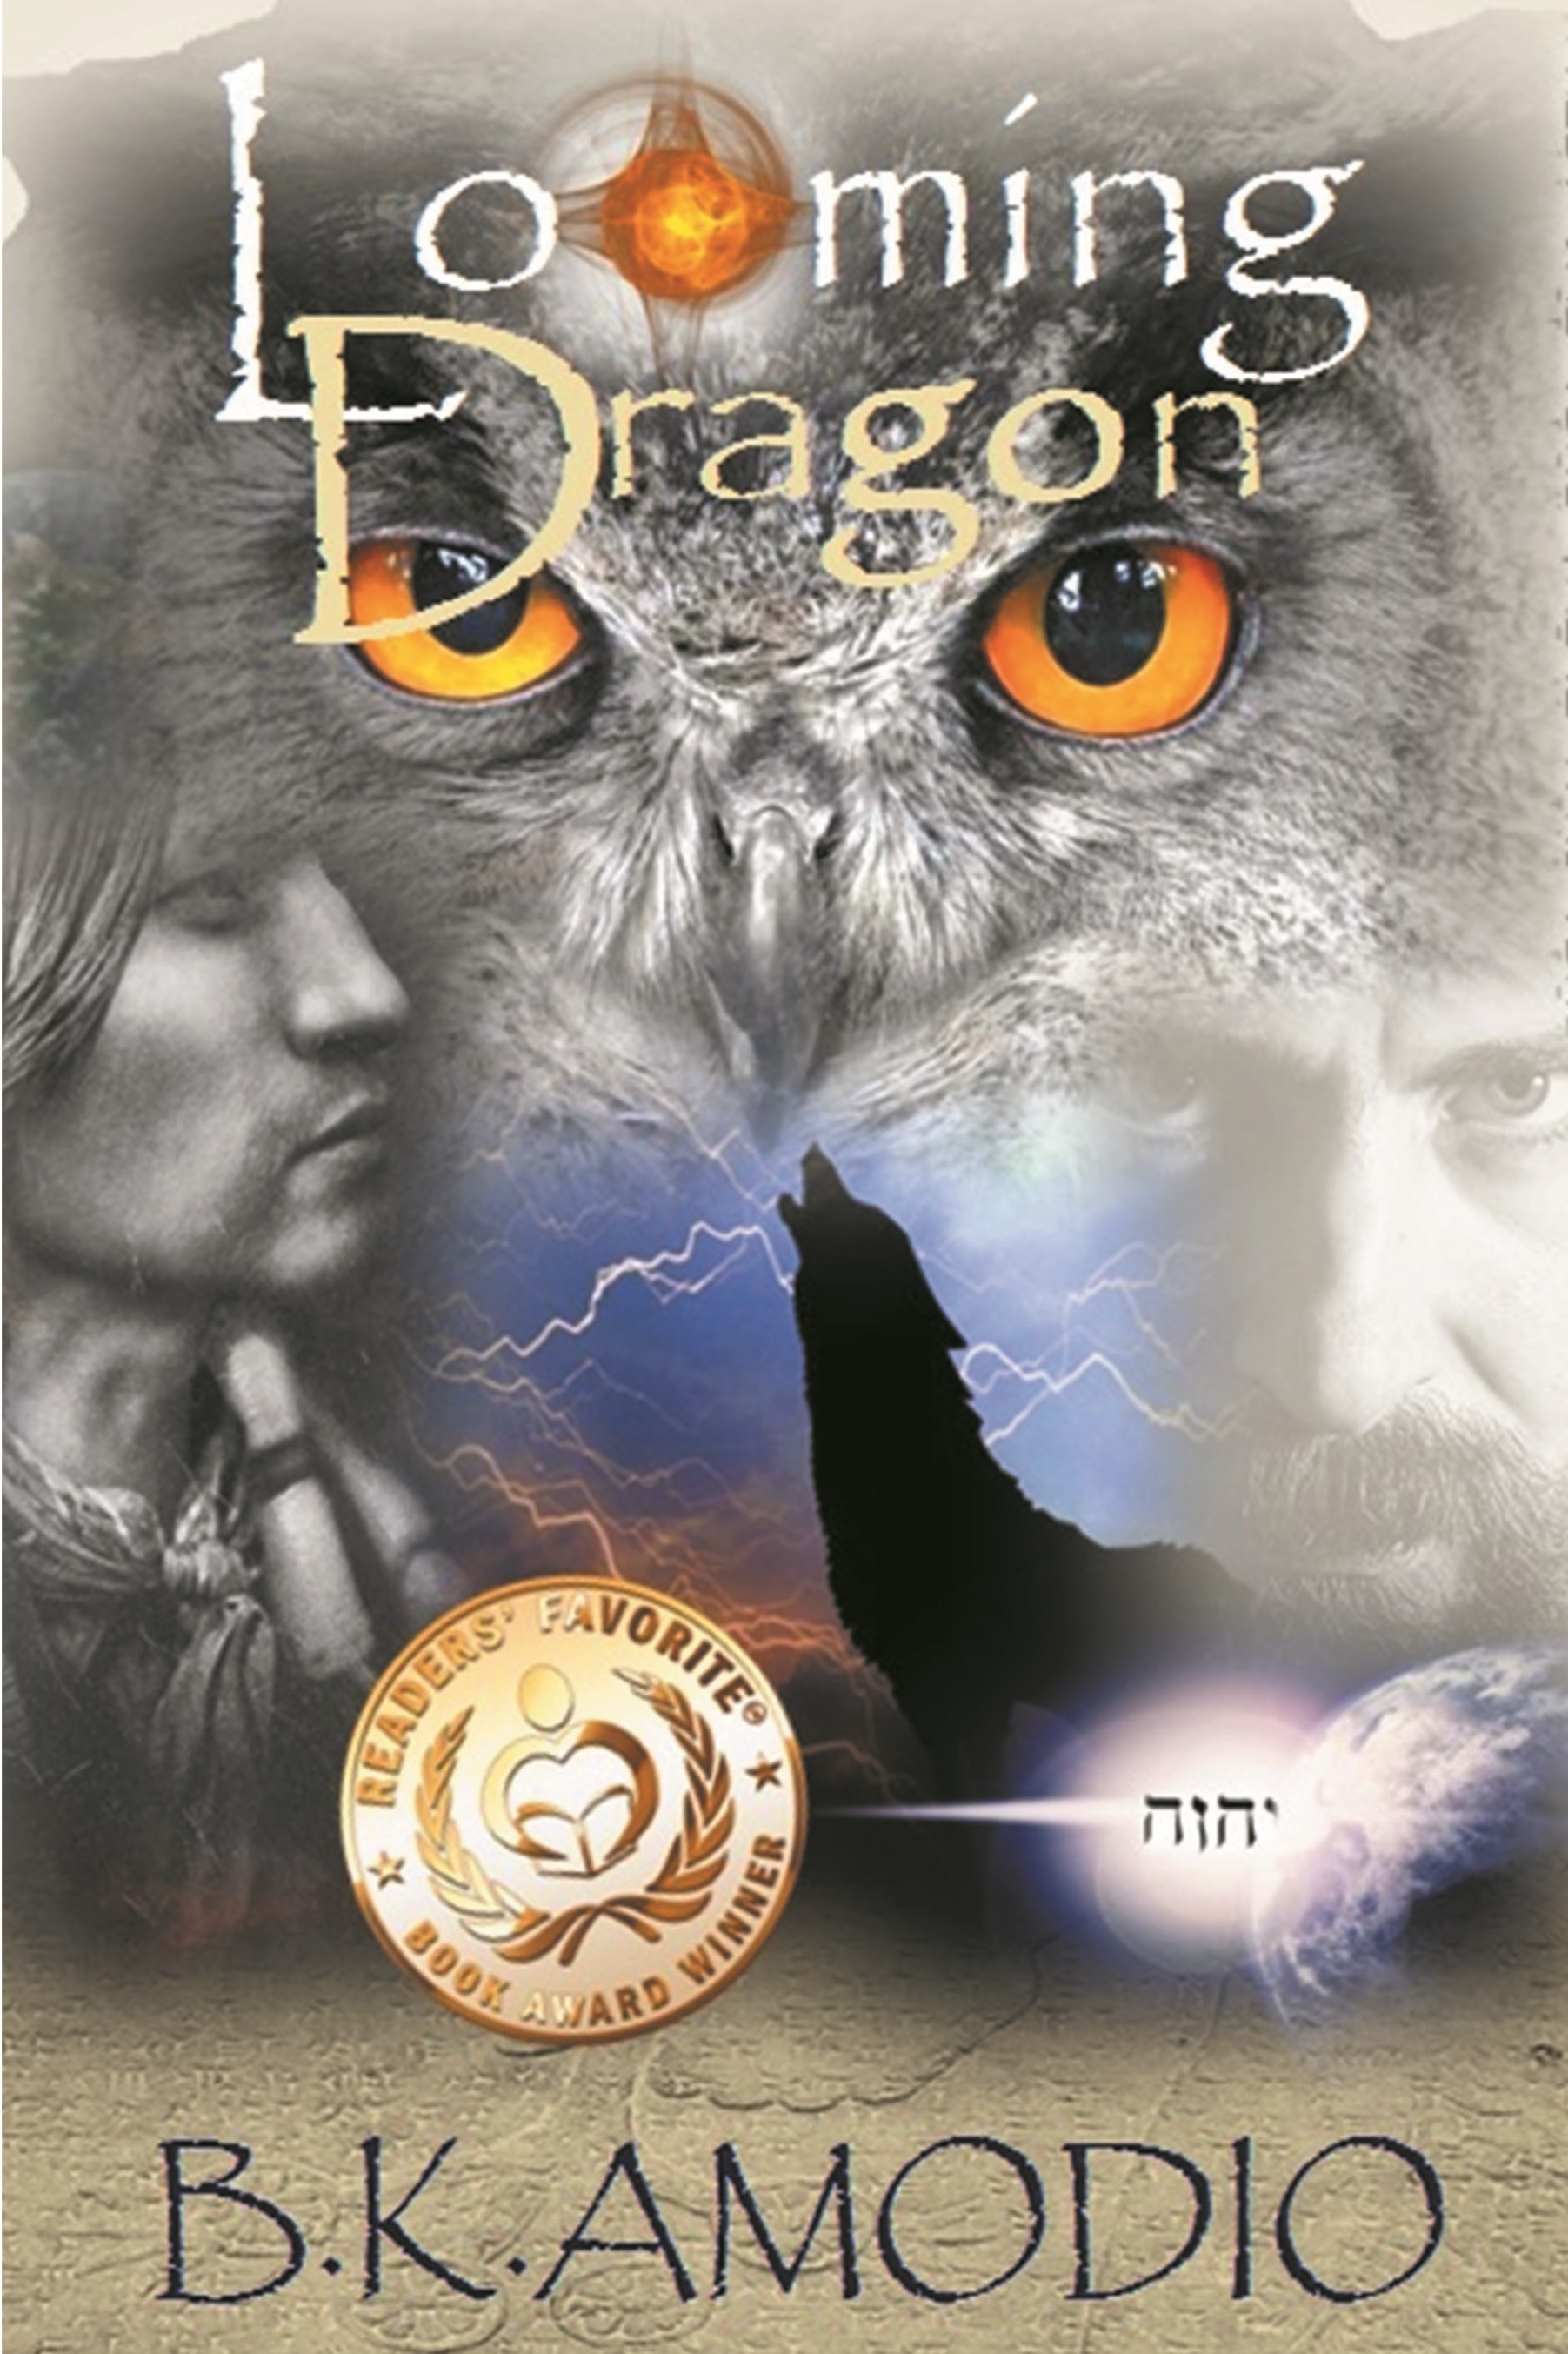 The Looming Dragon Cover Image